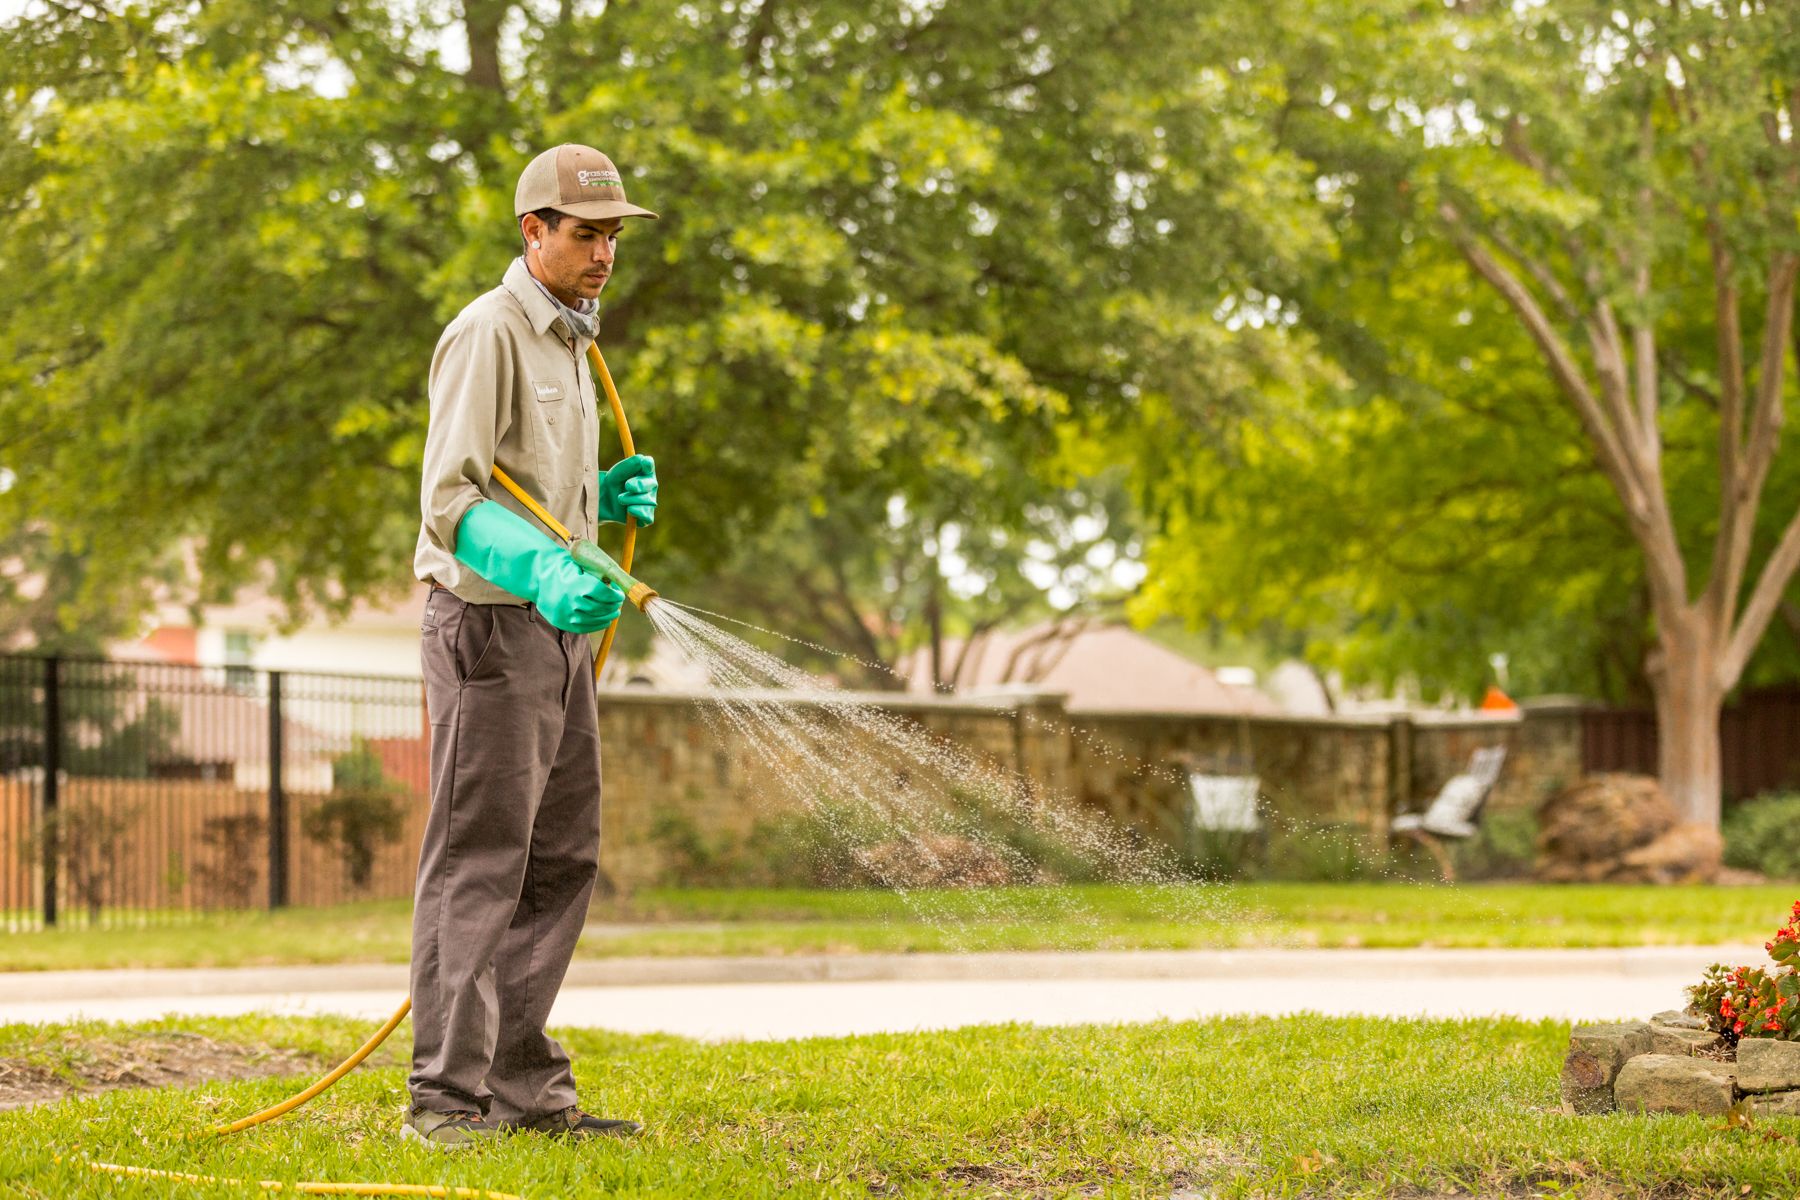 Lawn care technician spraying weeds in a lawn